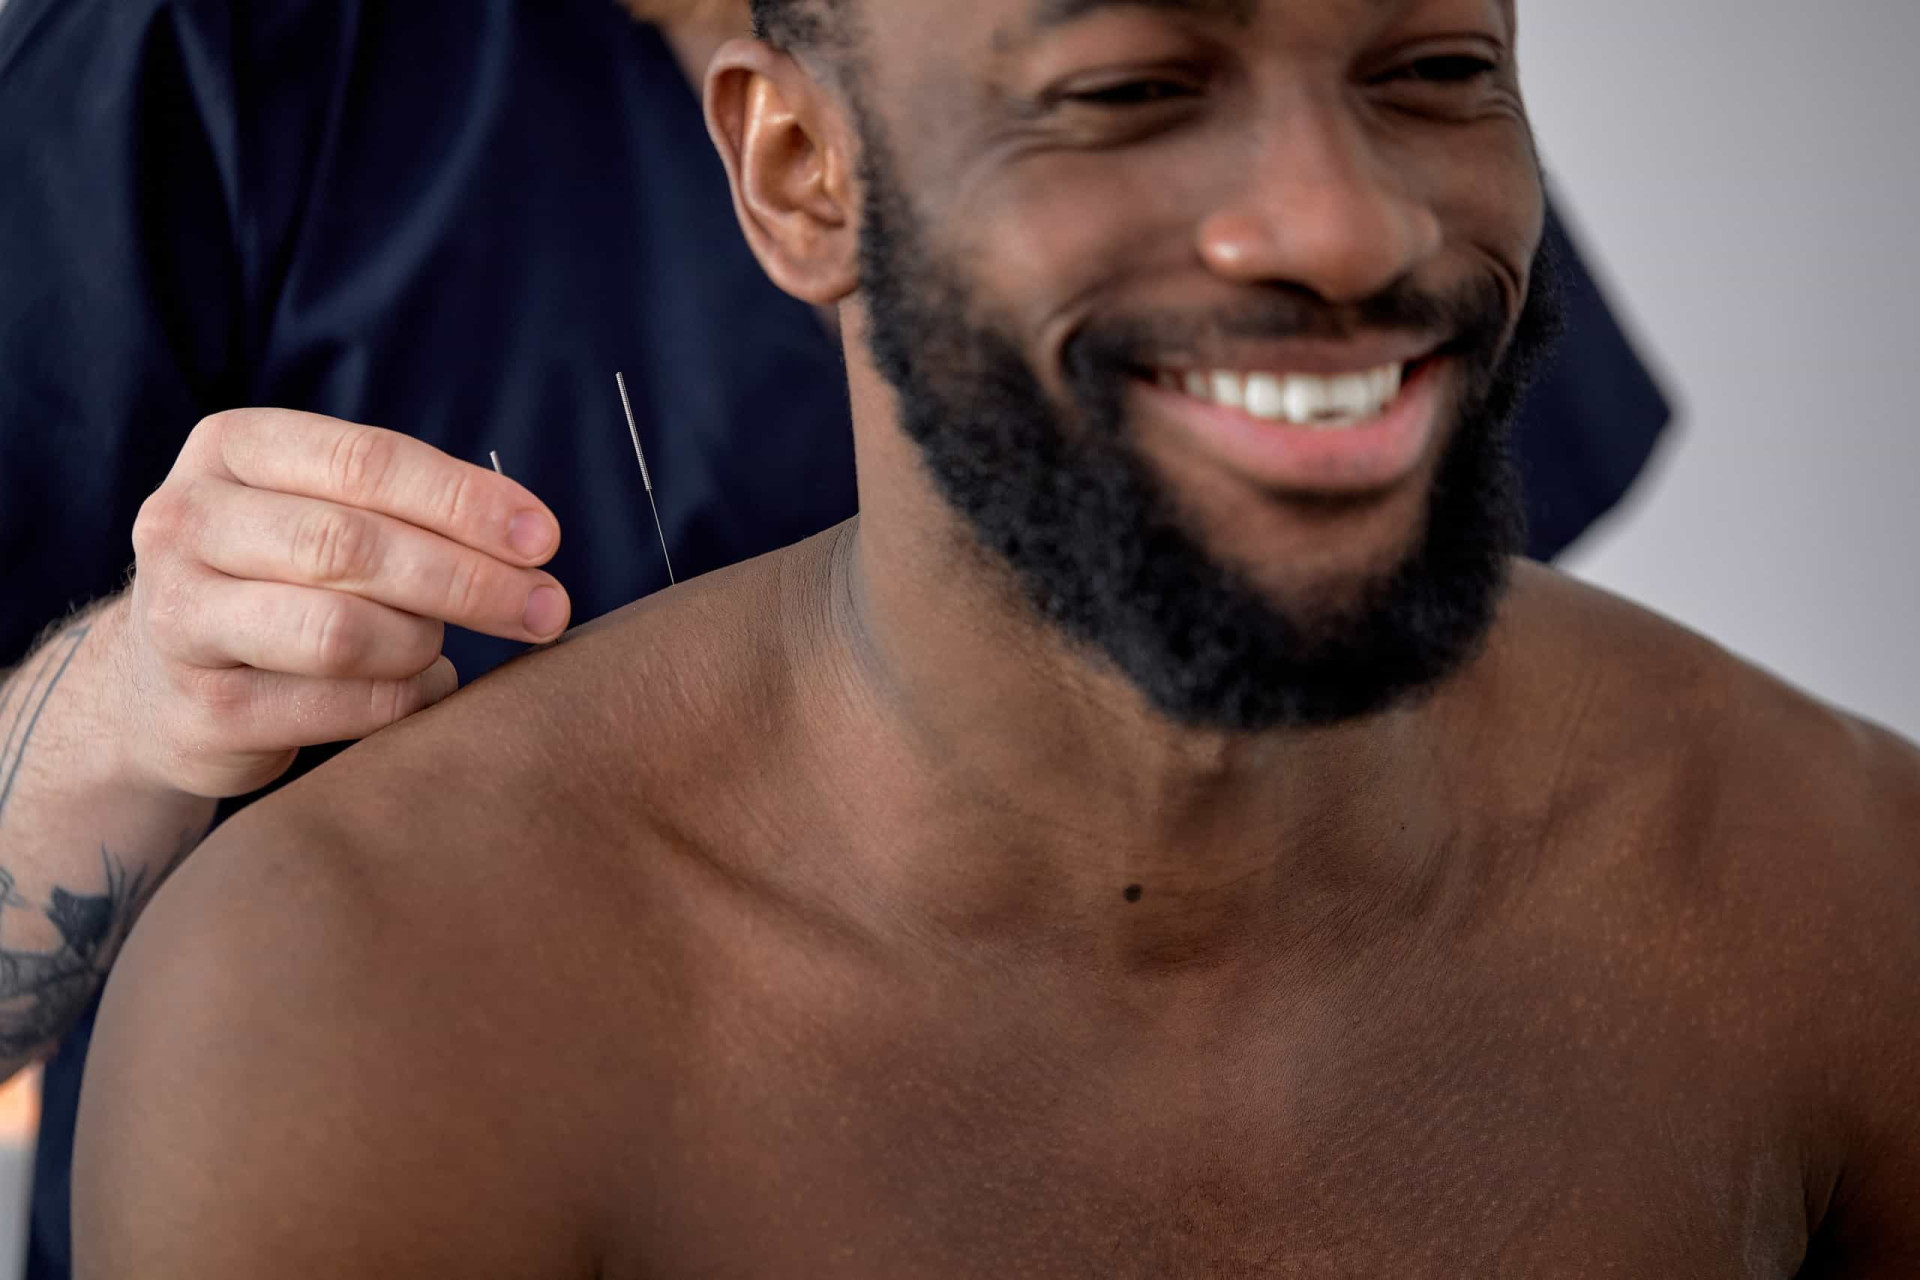 <p>Acupuncture is highly personalized. For example, if four people with migraines received acupuncture, then all of them would have entirely different acupuncture points chosen as part of their treatment plan.</p><p><a href="https://www.msn.com/en-us/community/channel/vid-7xx8mnucu55yw63we9va2gwr7uihbxwc68fxqp25x6tg4ftibpra?cvid=94631541bc0f4f89bfd59158d696ad7e">Follow us and access great exclusive content every day</a></p>